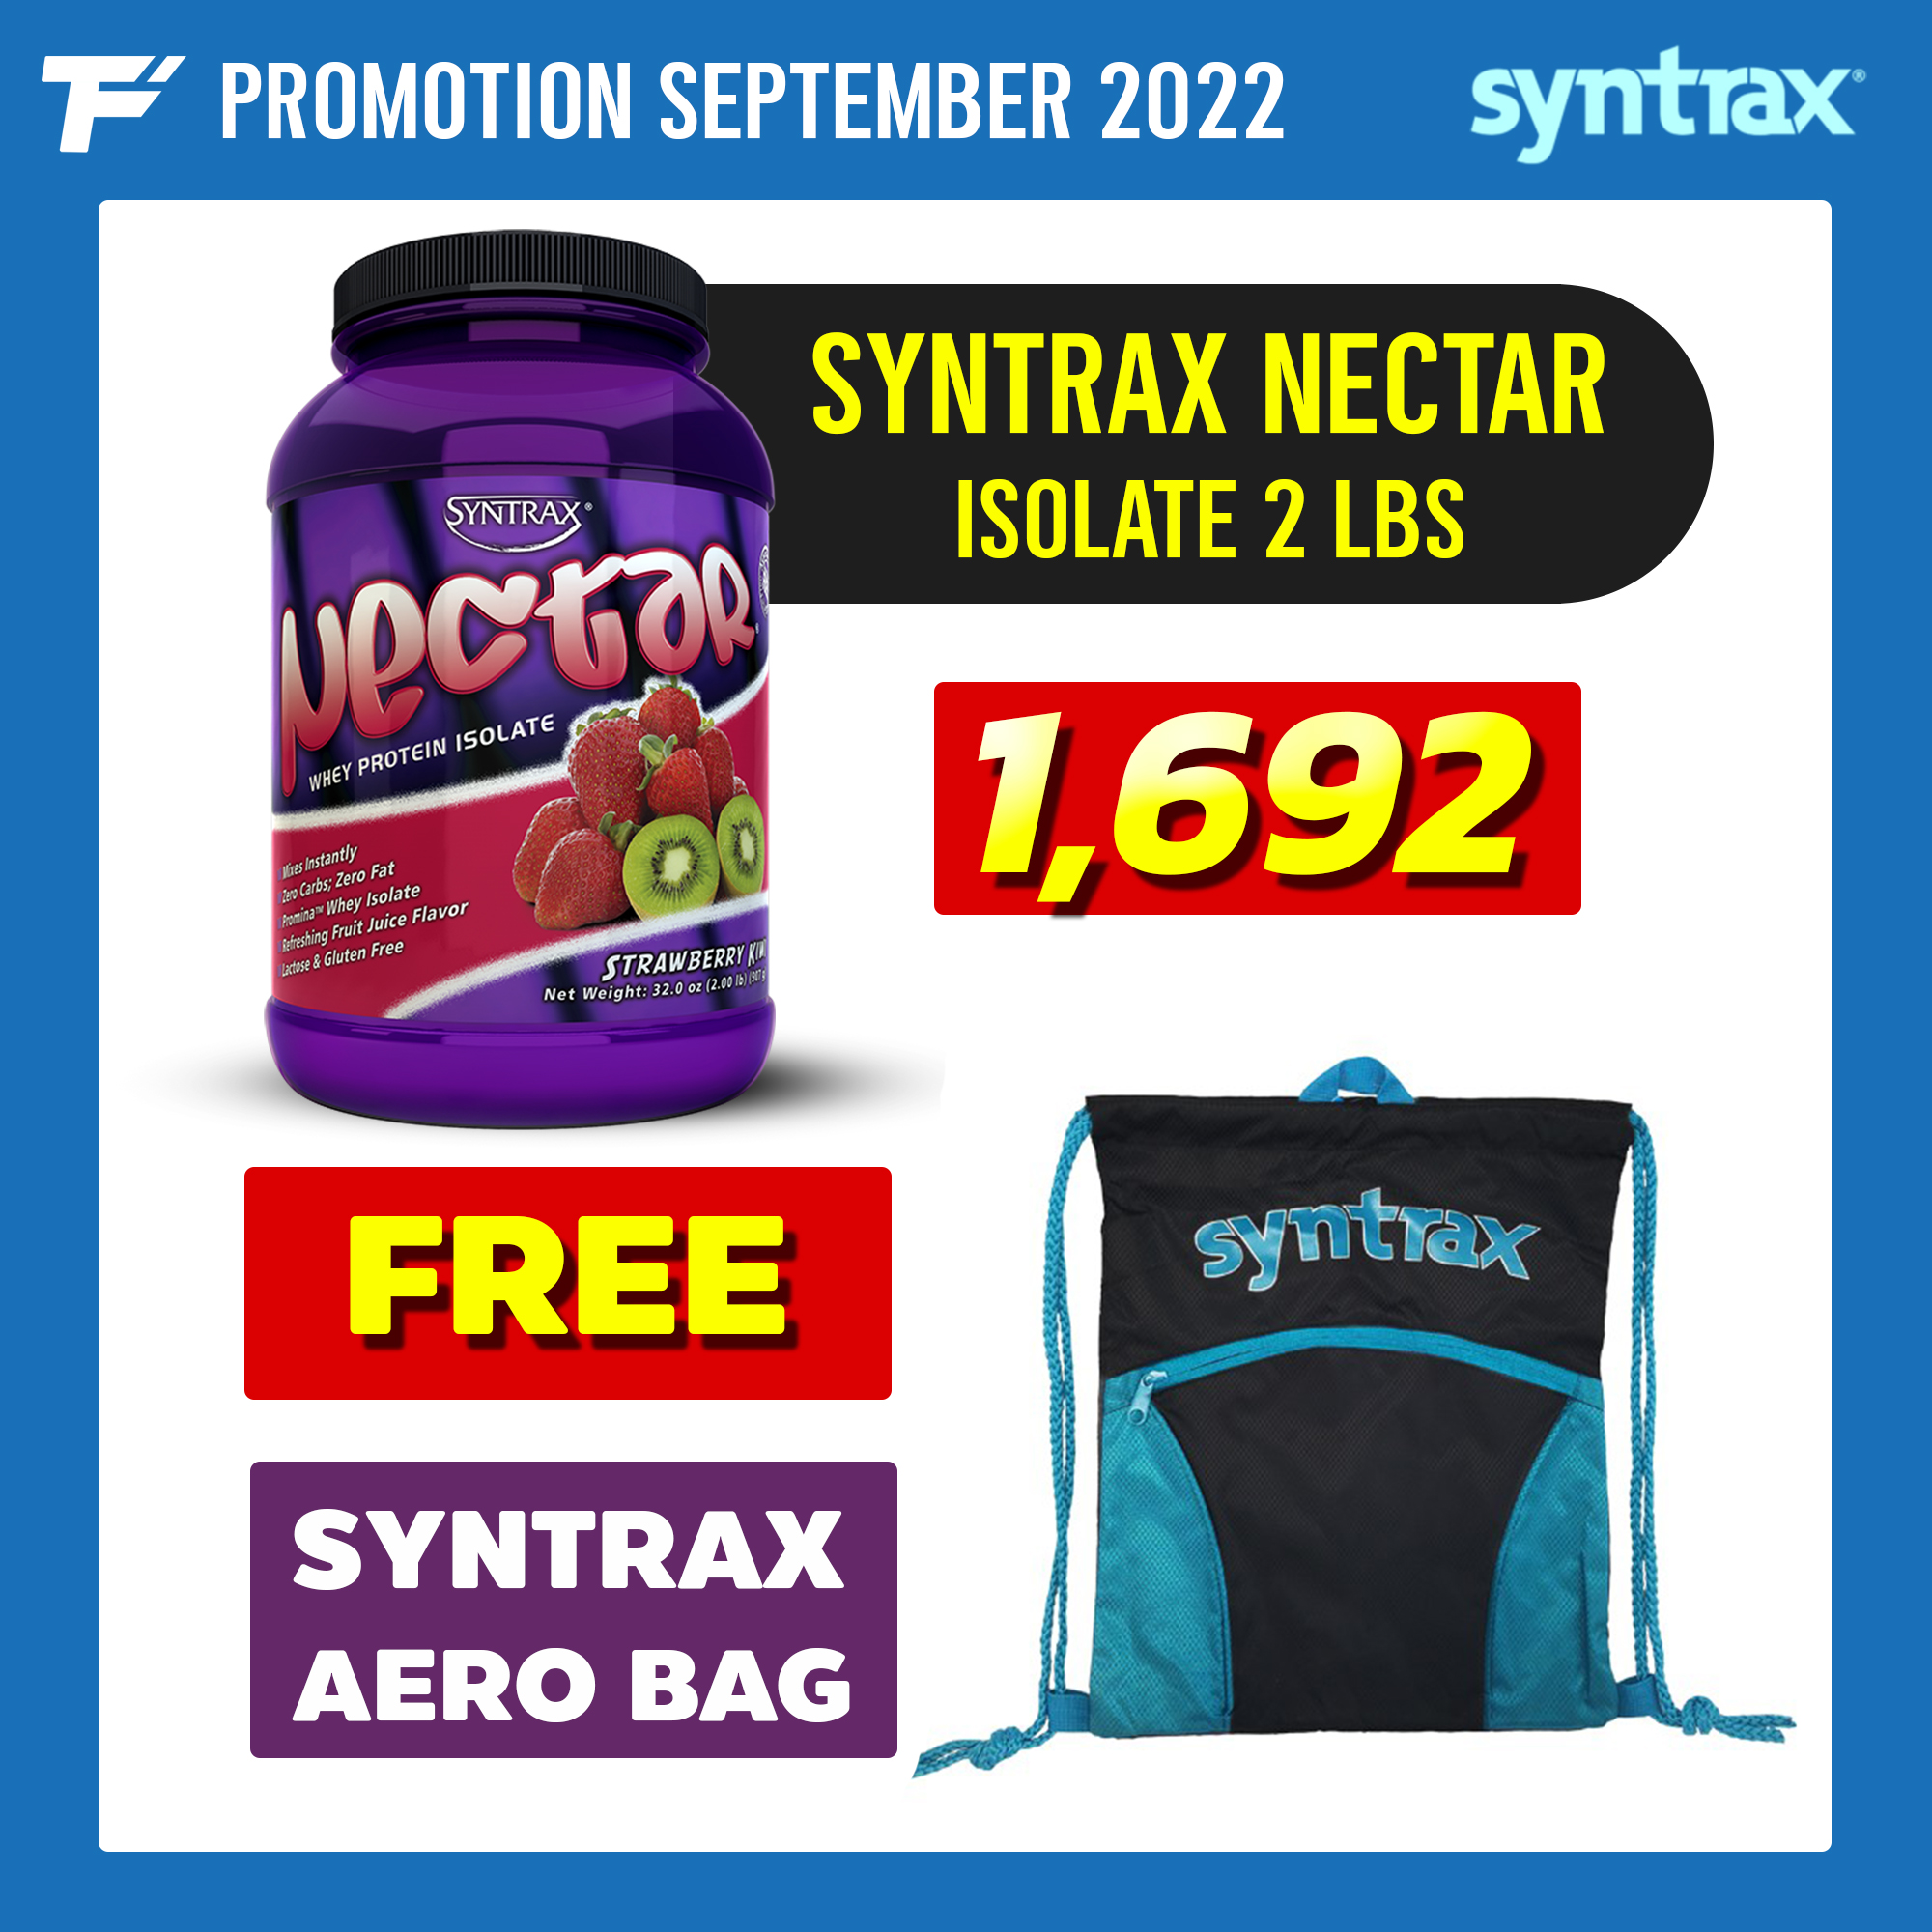 Syntrax Nectar Natural 100% Whey Protein Isolate - 2 LB FREE SHAKER